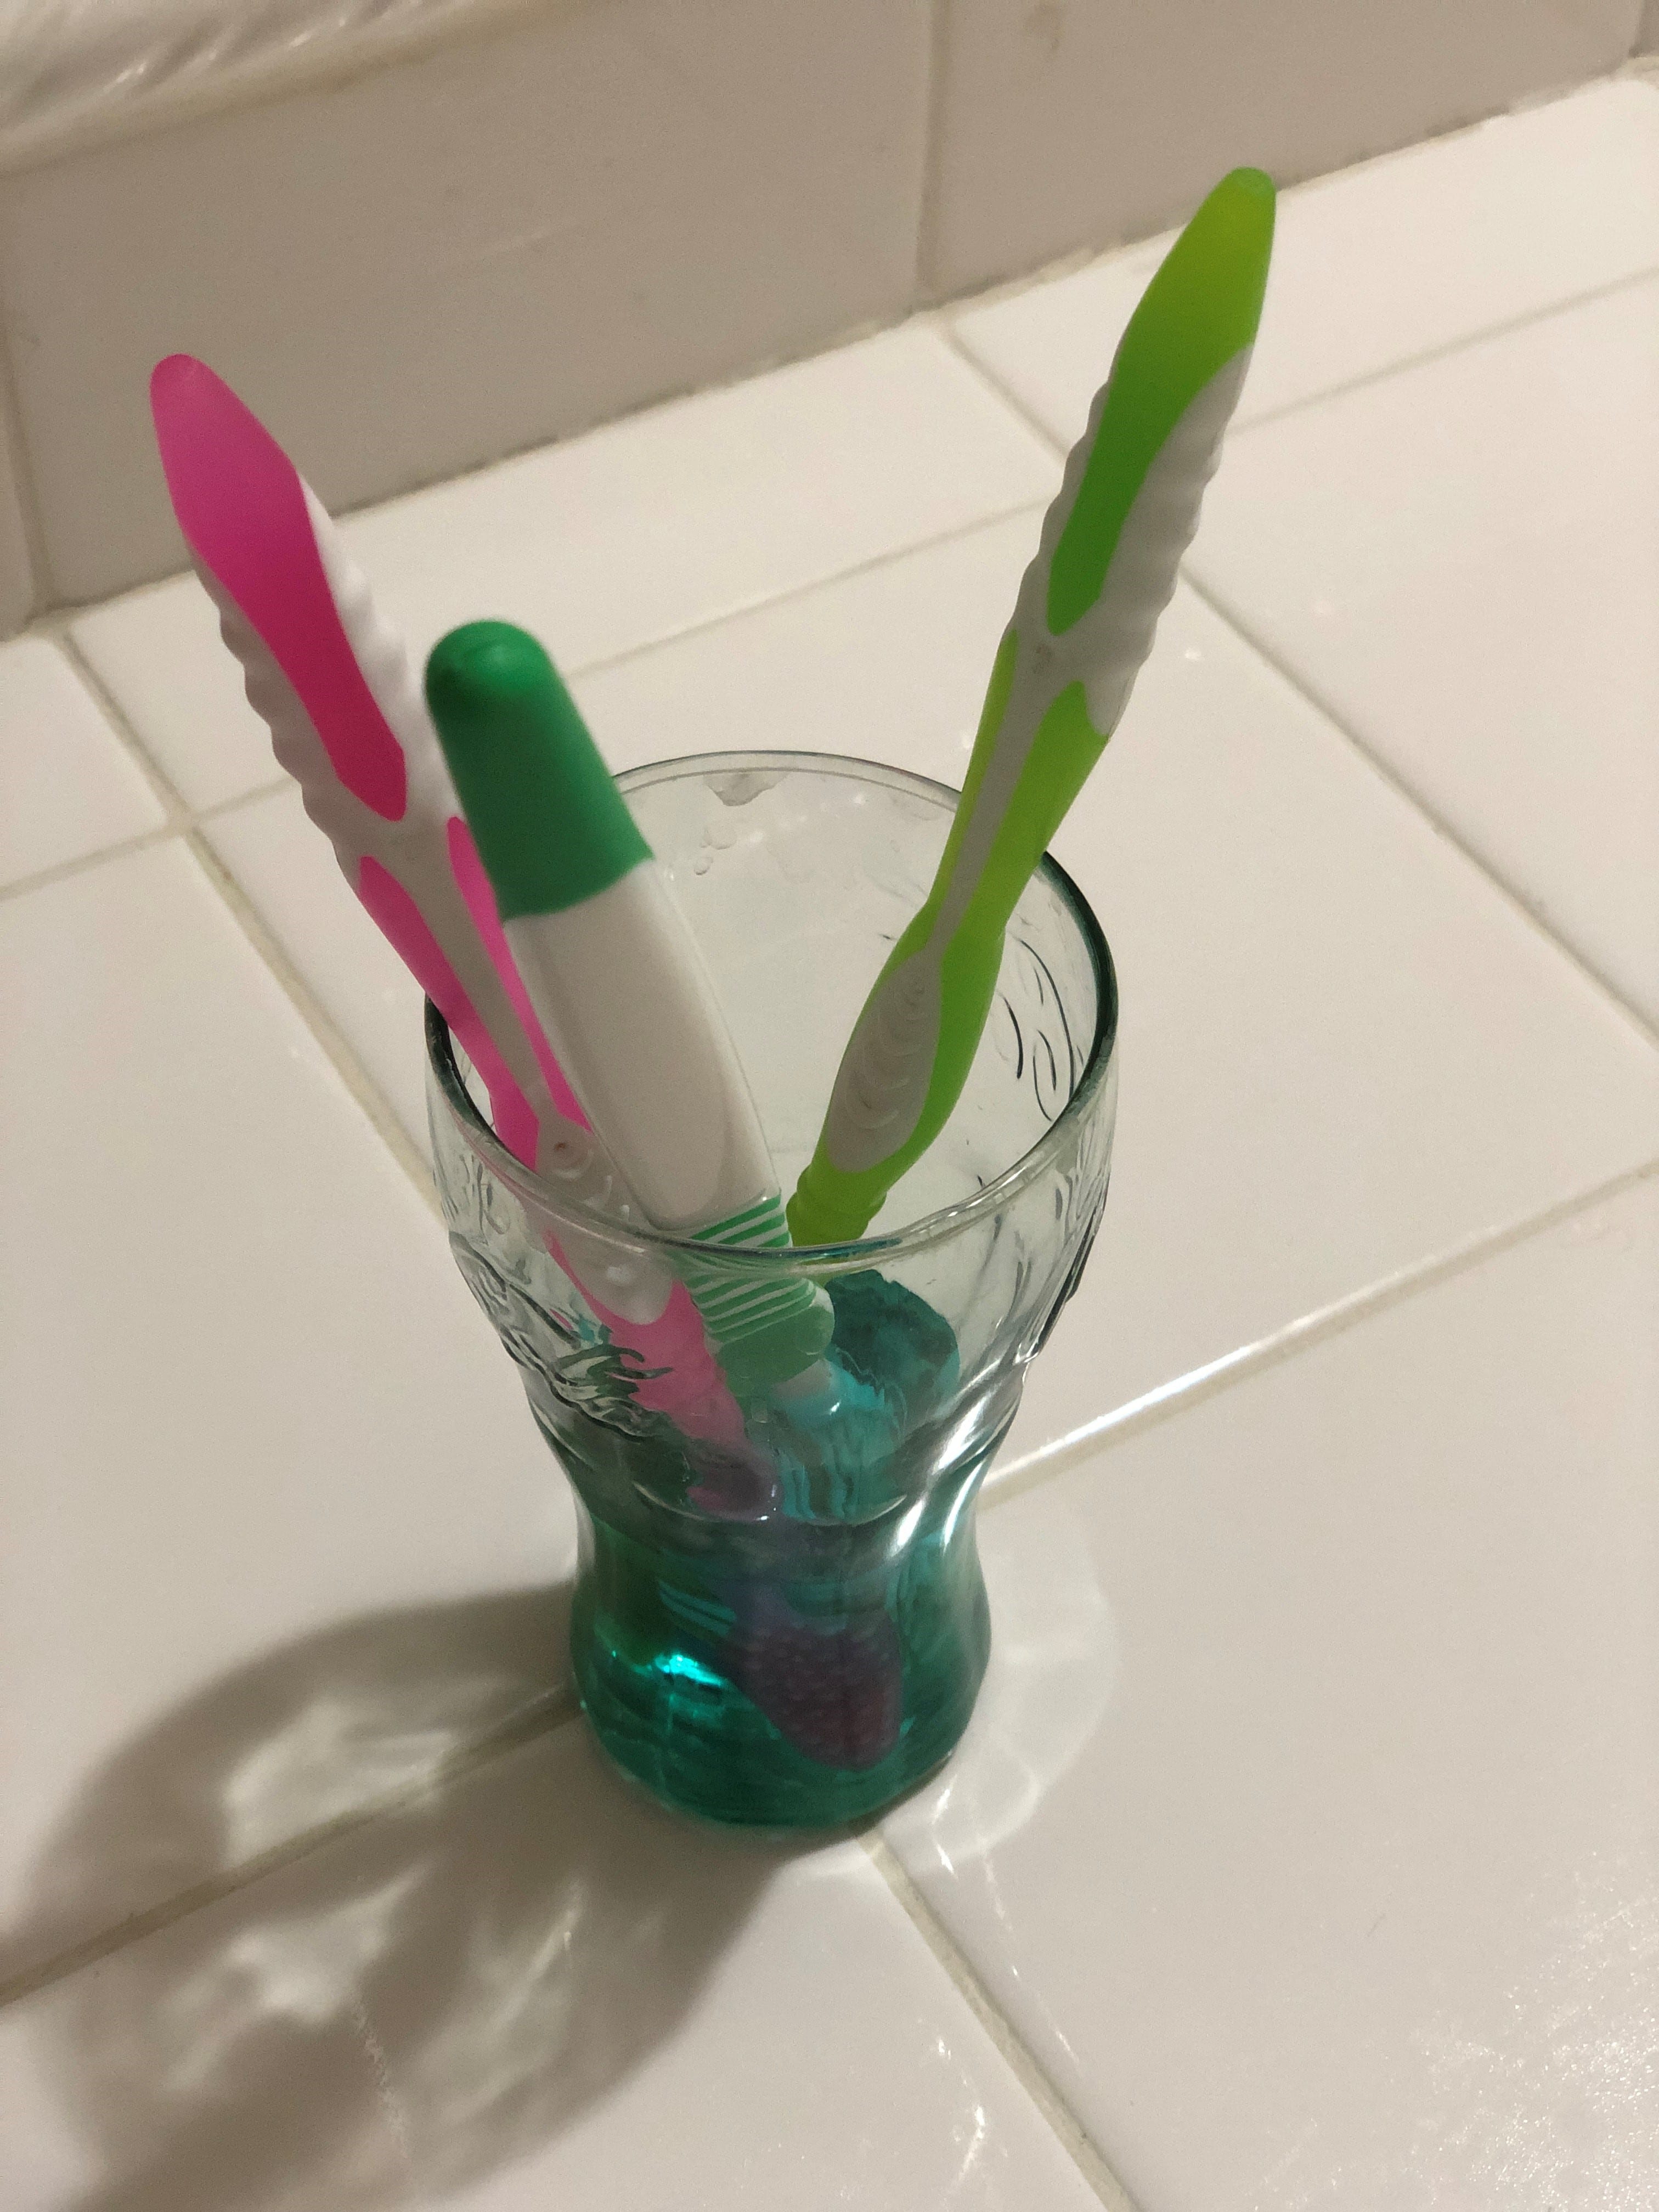 Pour mouthwash into a small narrow cup/glass and soak toothbrushes